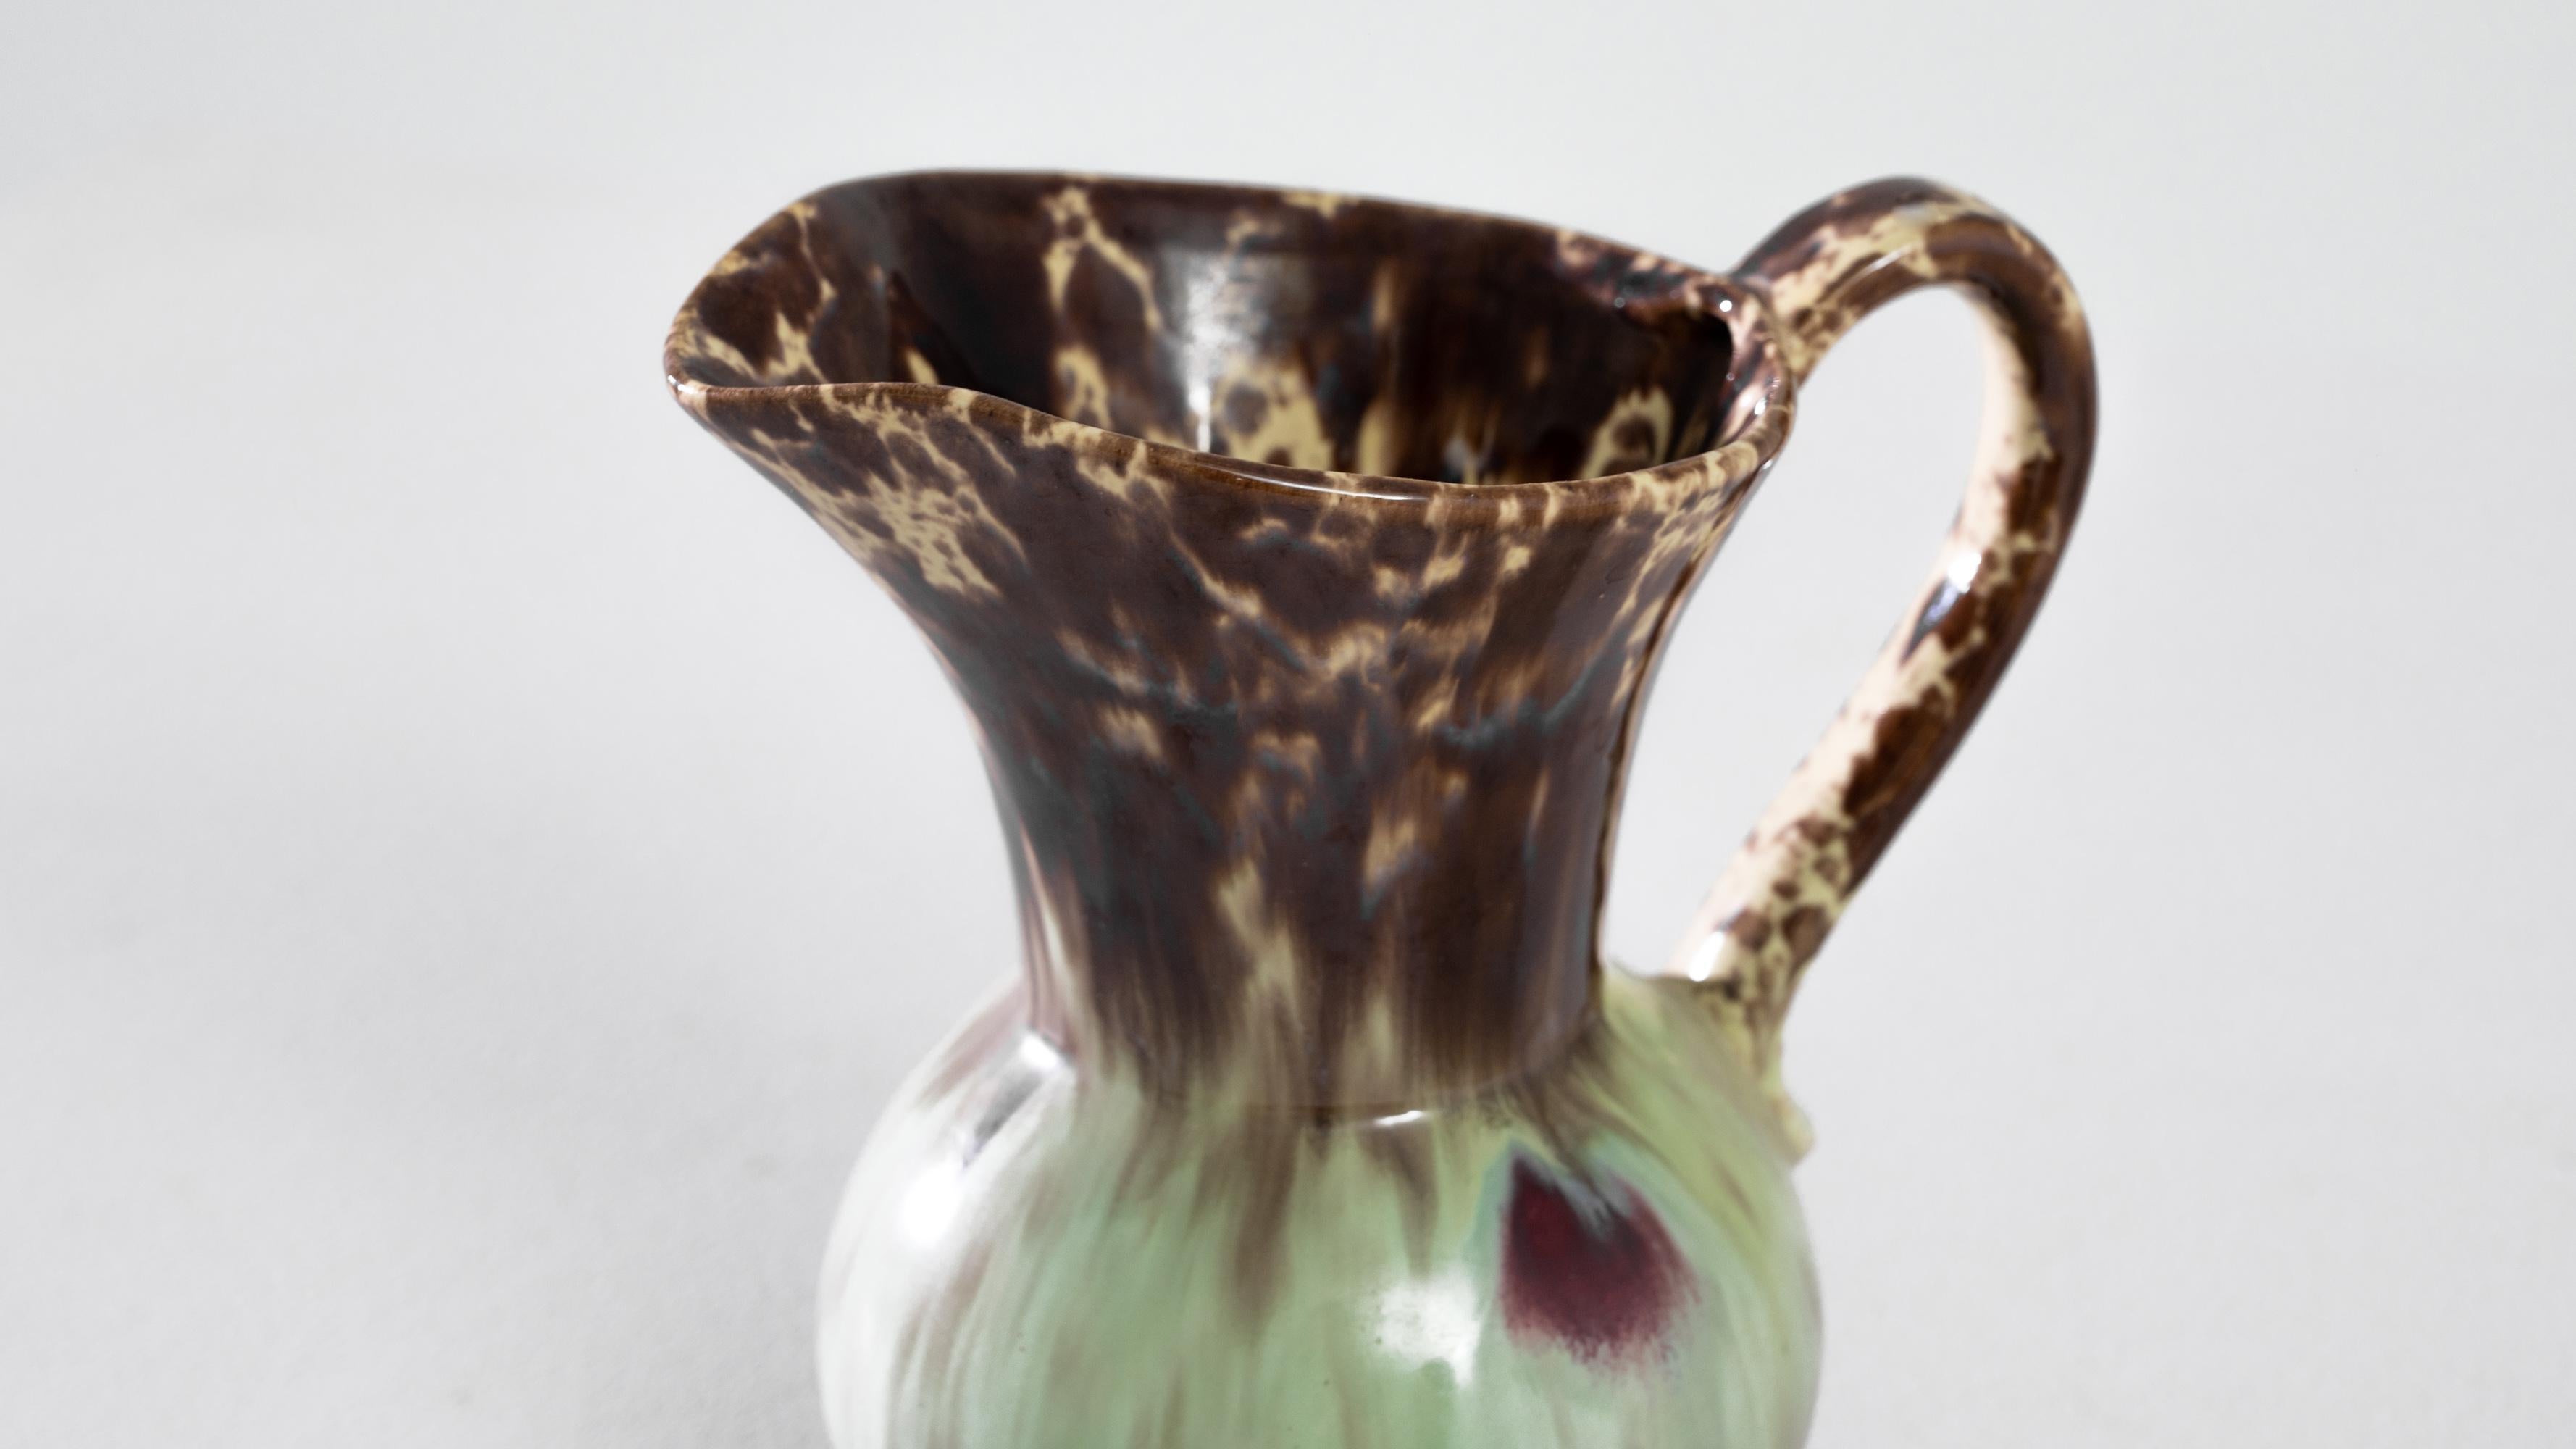 Discover a piece of 1960s German craftsmanship with this ceramic vase, distinguished by its 